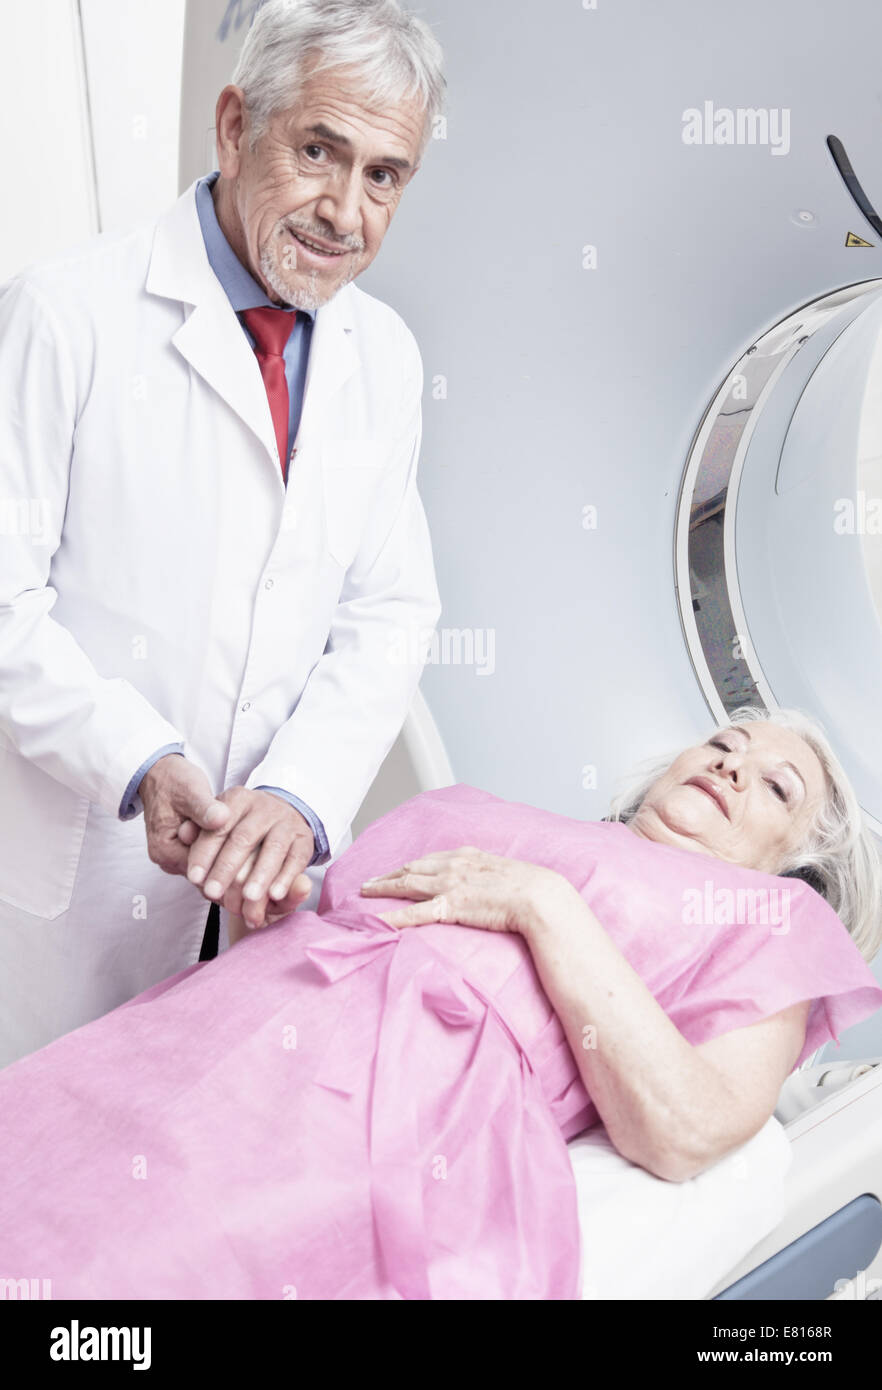 Male doctor reassuring female patient before computed tomography scan. Stock Photo